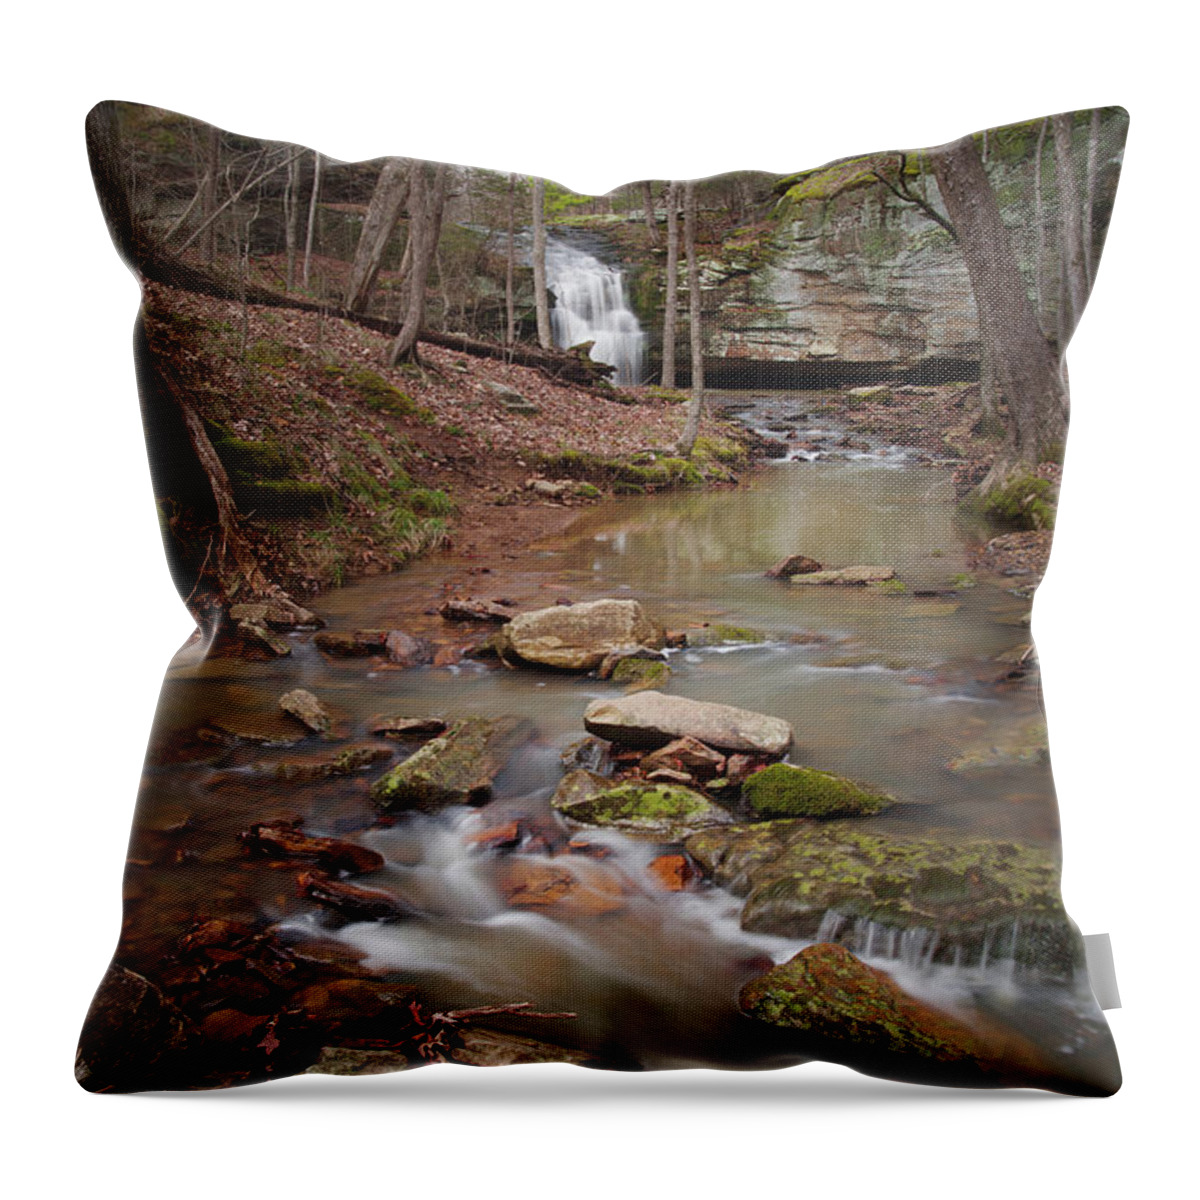 Waterfall Throw Pillow featuring the photograph Winter Creek and Falls by Grant Twiss